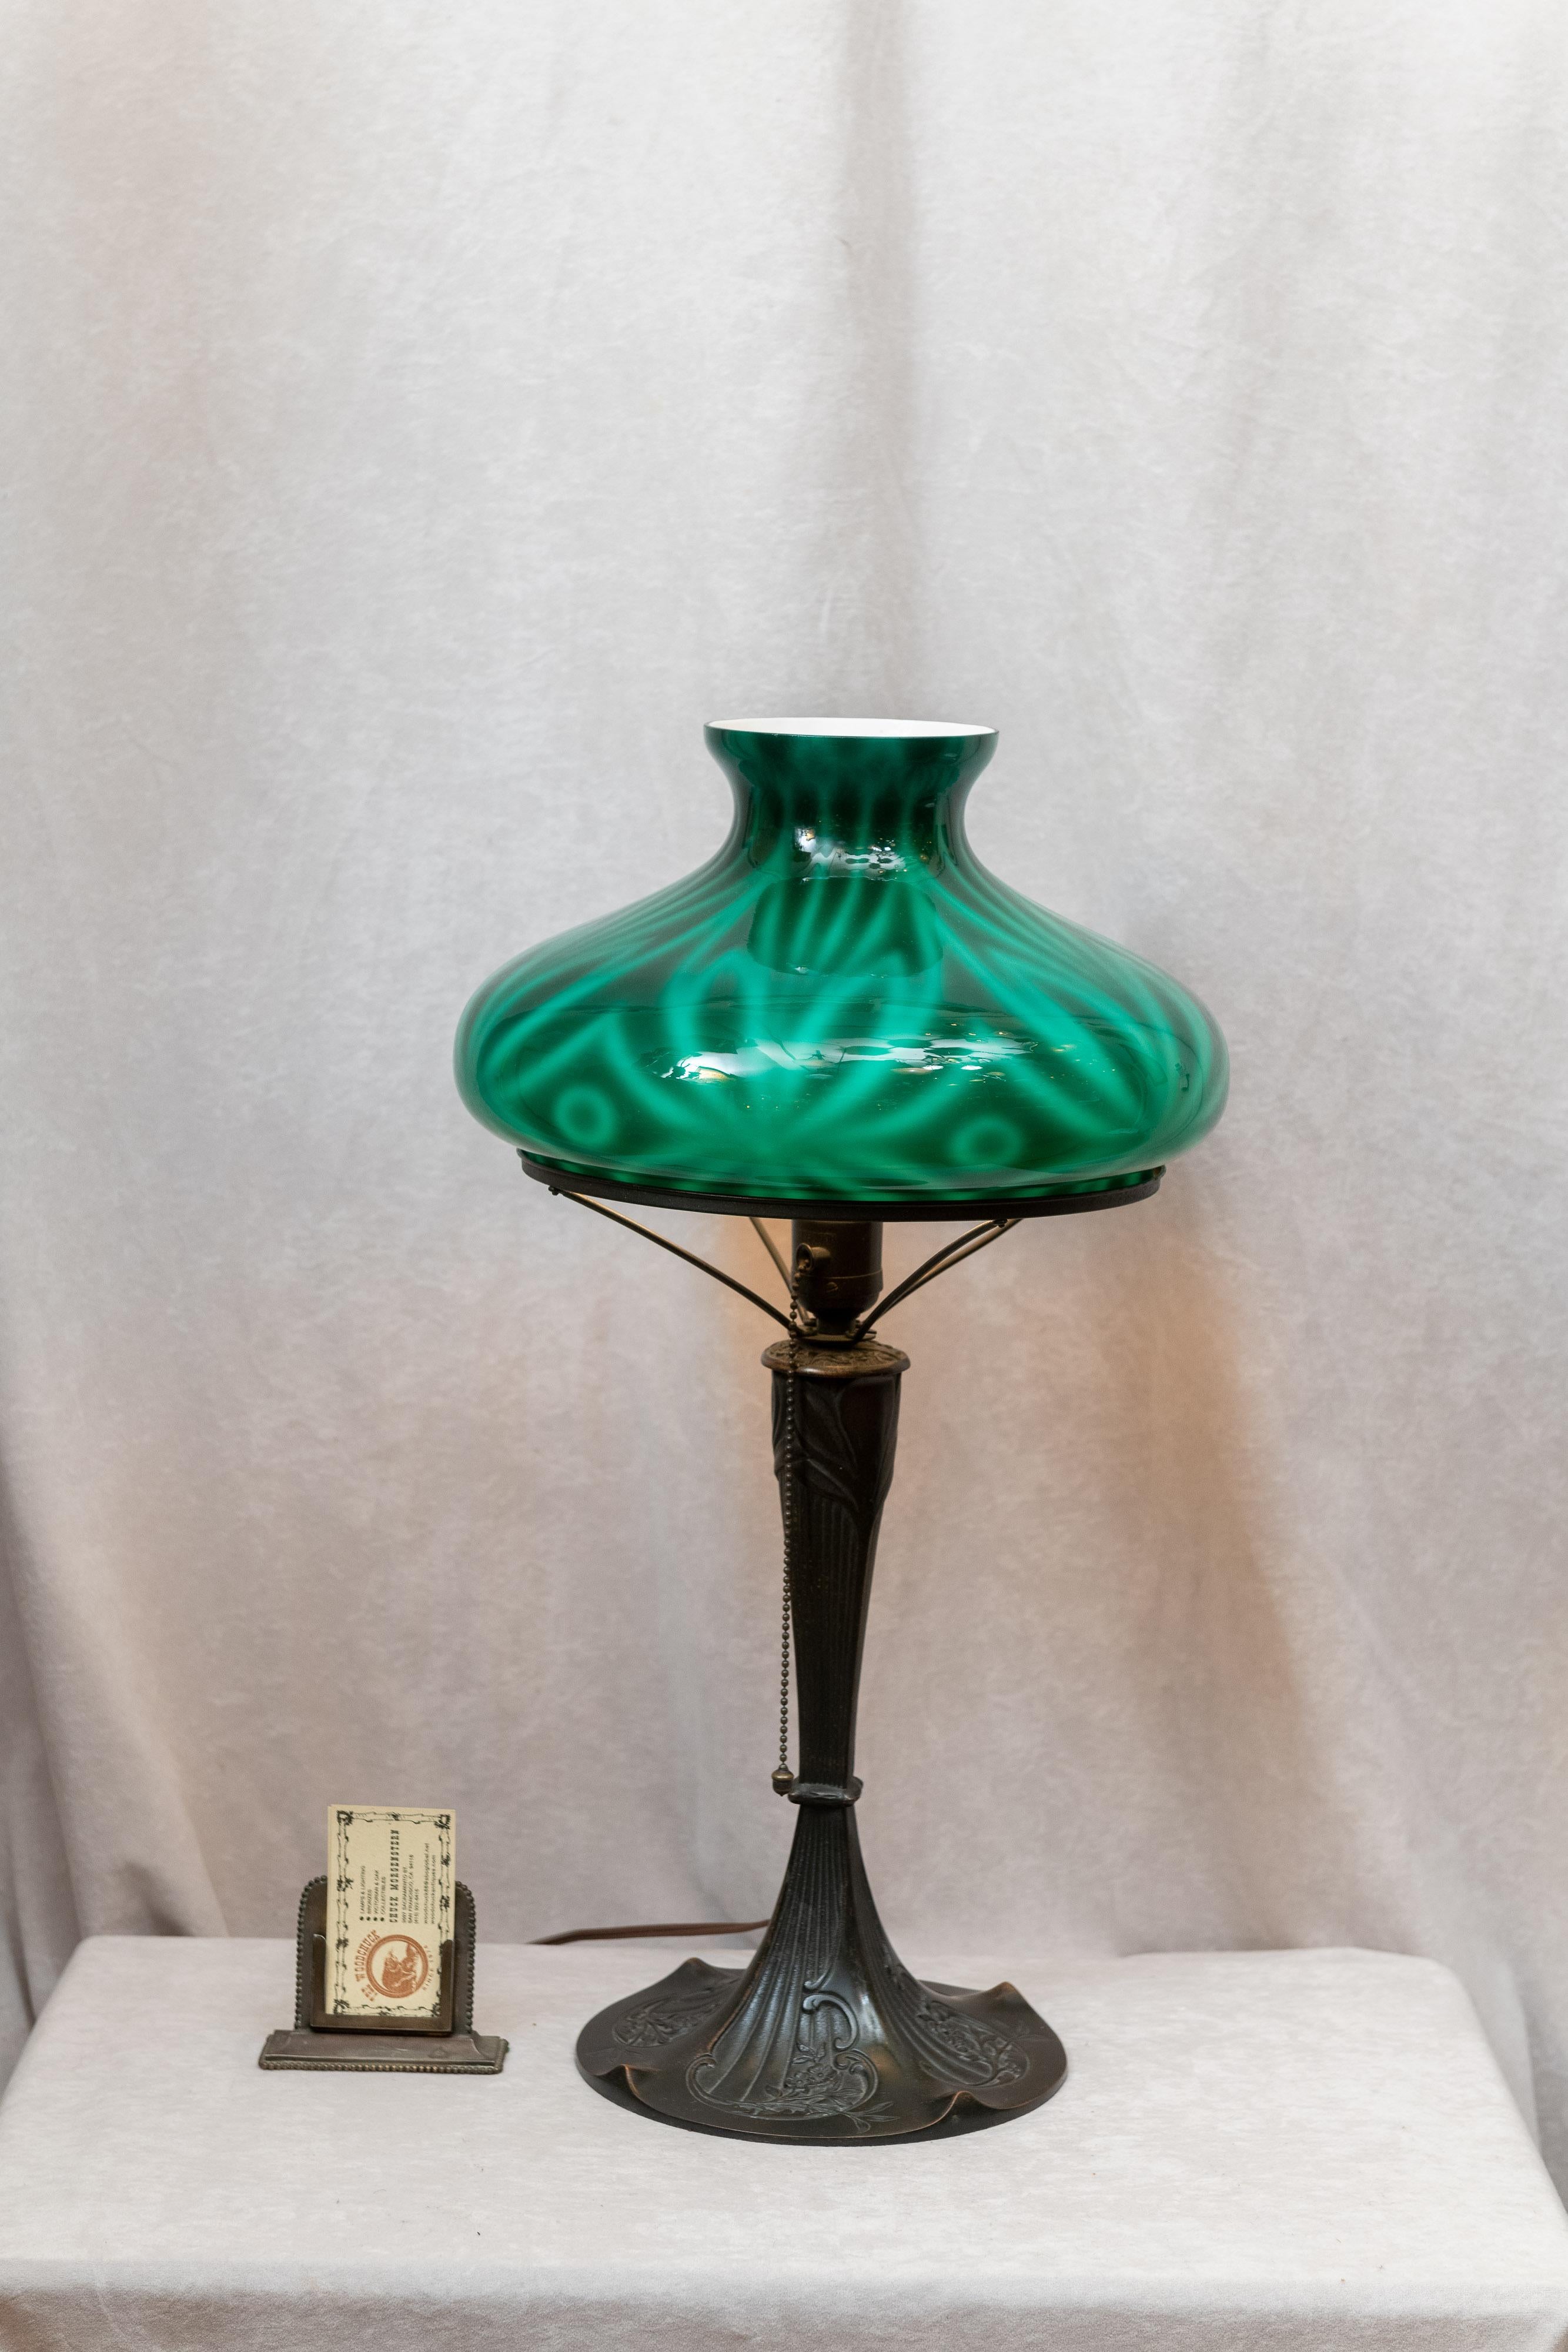 This lamp is really eye catching. I am sorry to say that photographs don't show how beautiful the glass looks in person. While we have seen this particular shade on rare occasions, we have never seen one on such a base as wonderful as this one. The